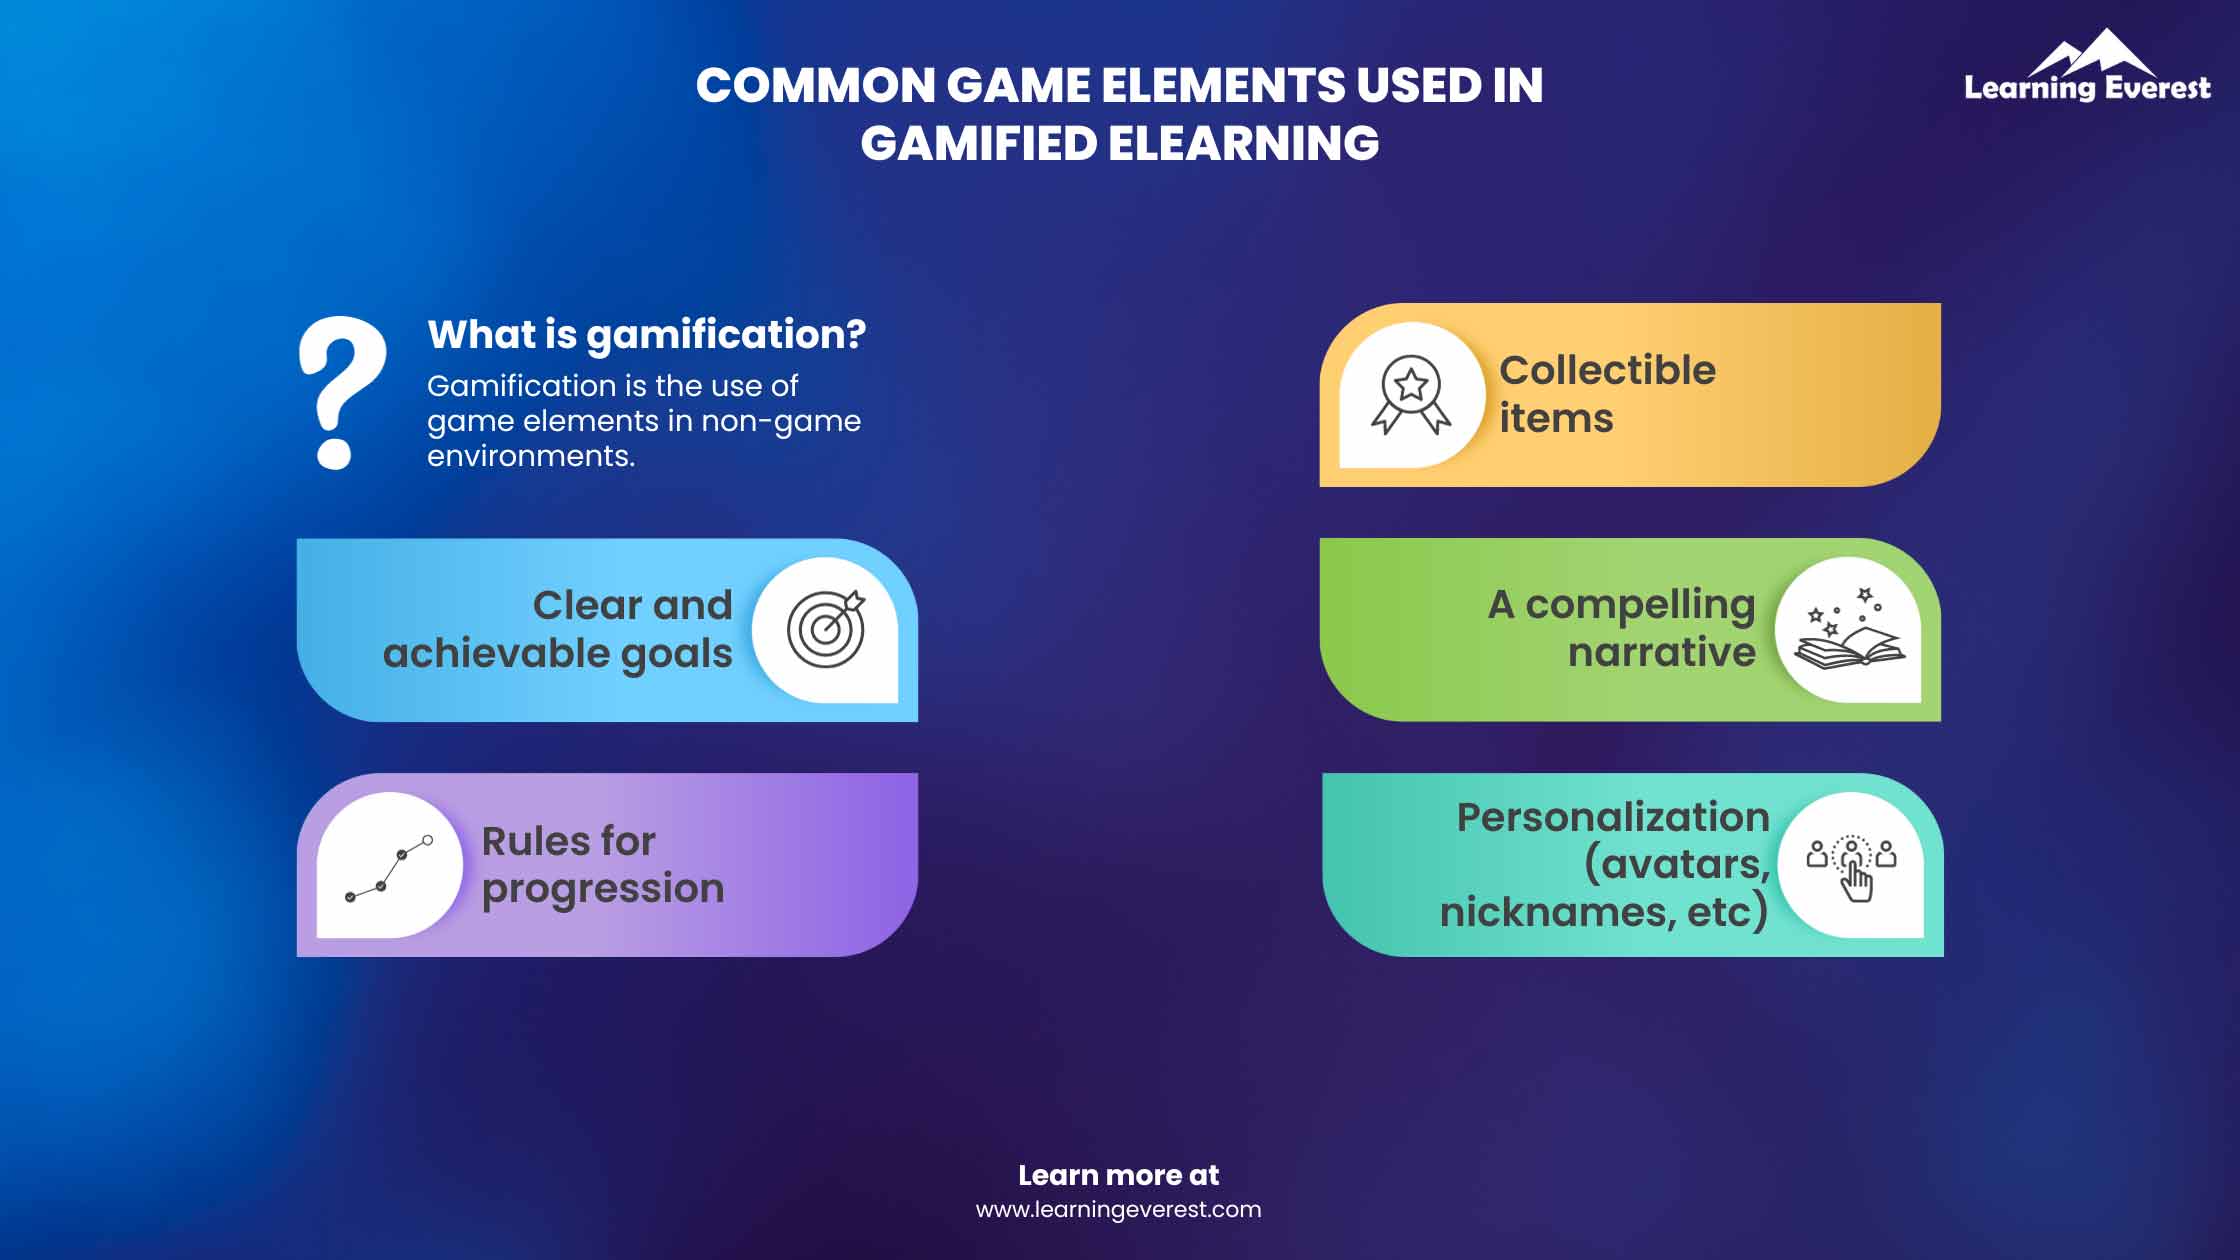 Common Game Elements Used in Gamified eLearning